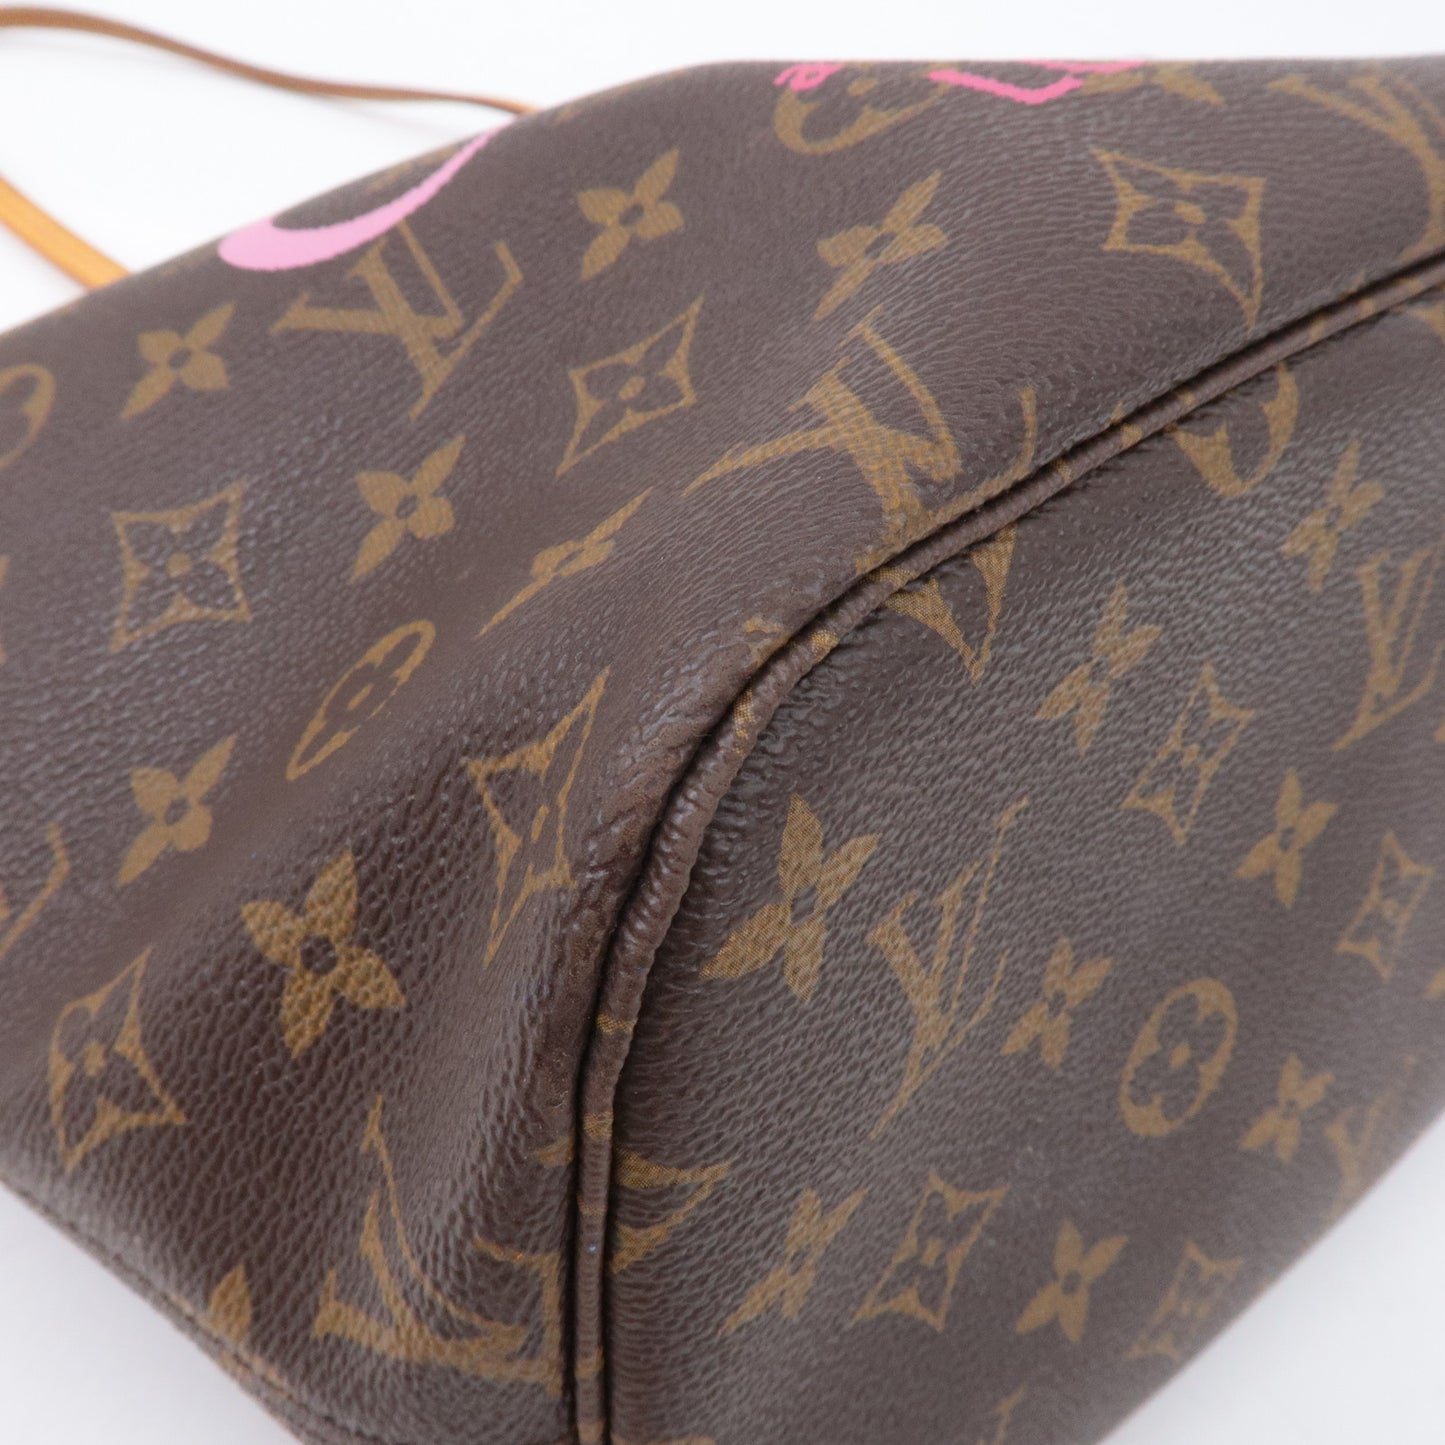 Louis-Vuitton-Monogram-Neverfull-MM-Tote-Bag-Hawaii-Limited-M43299